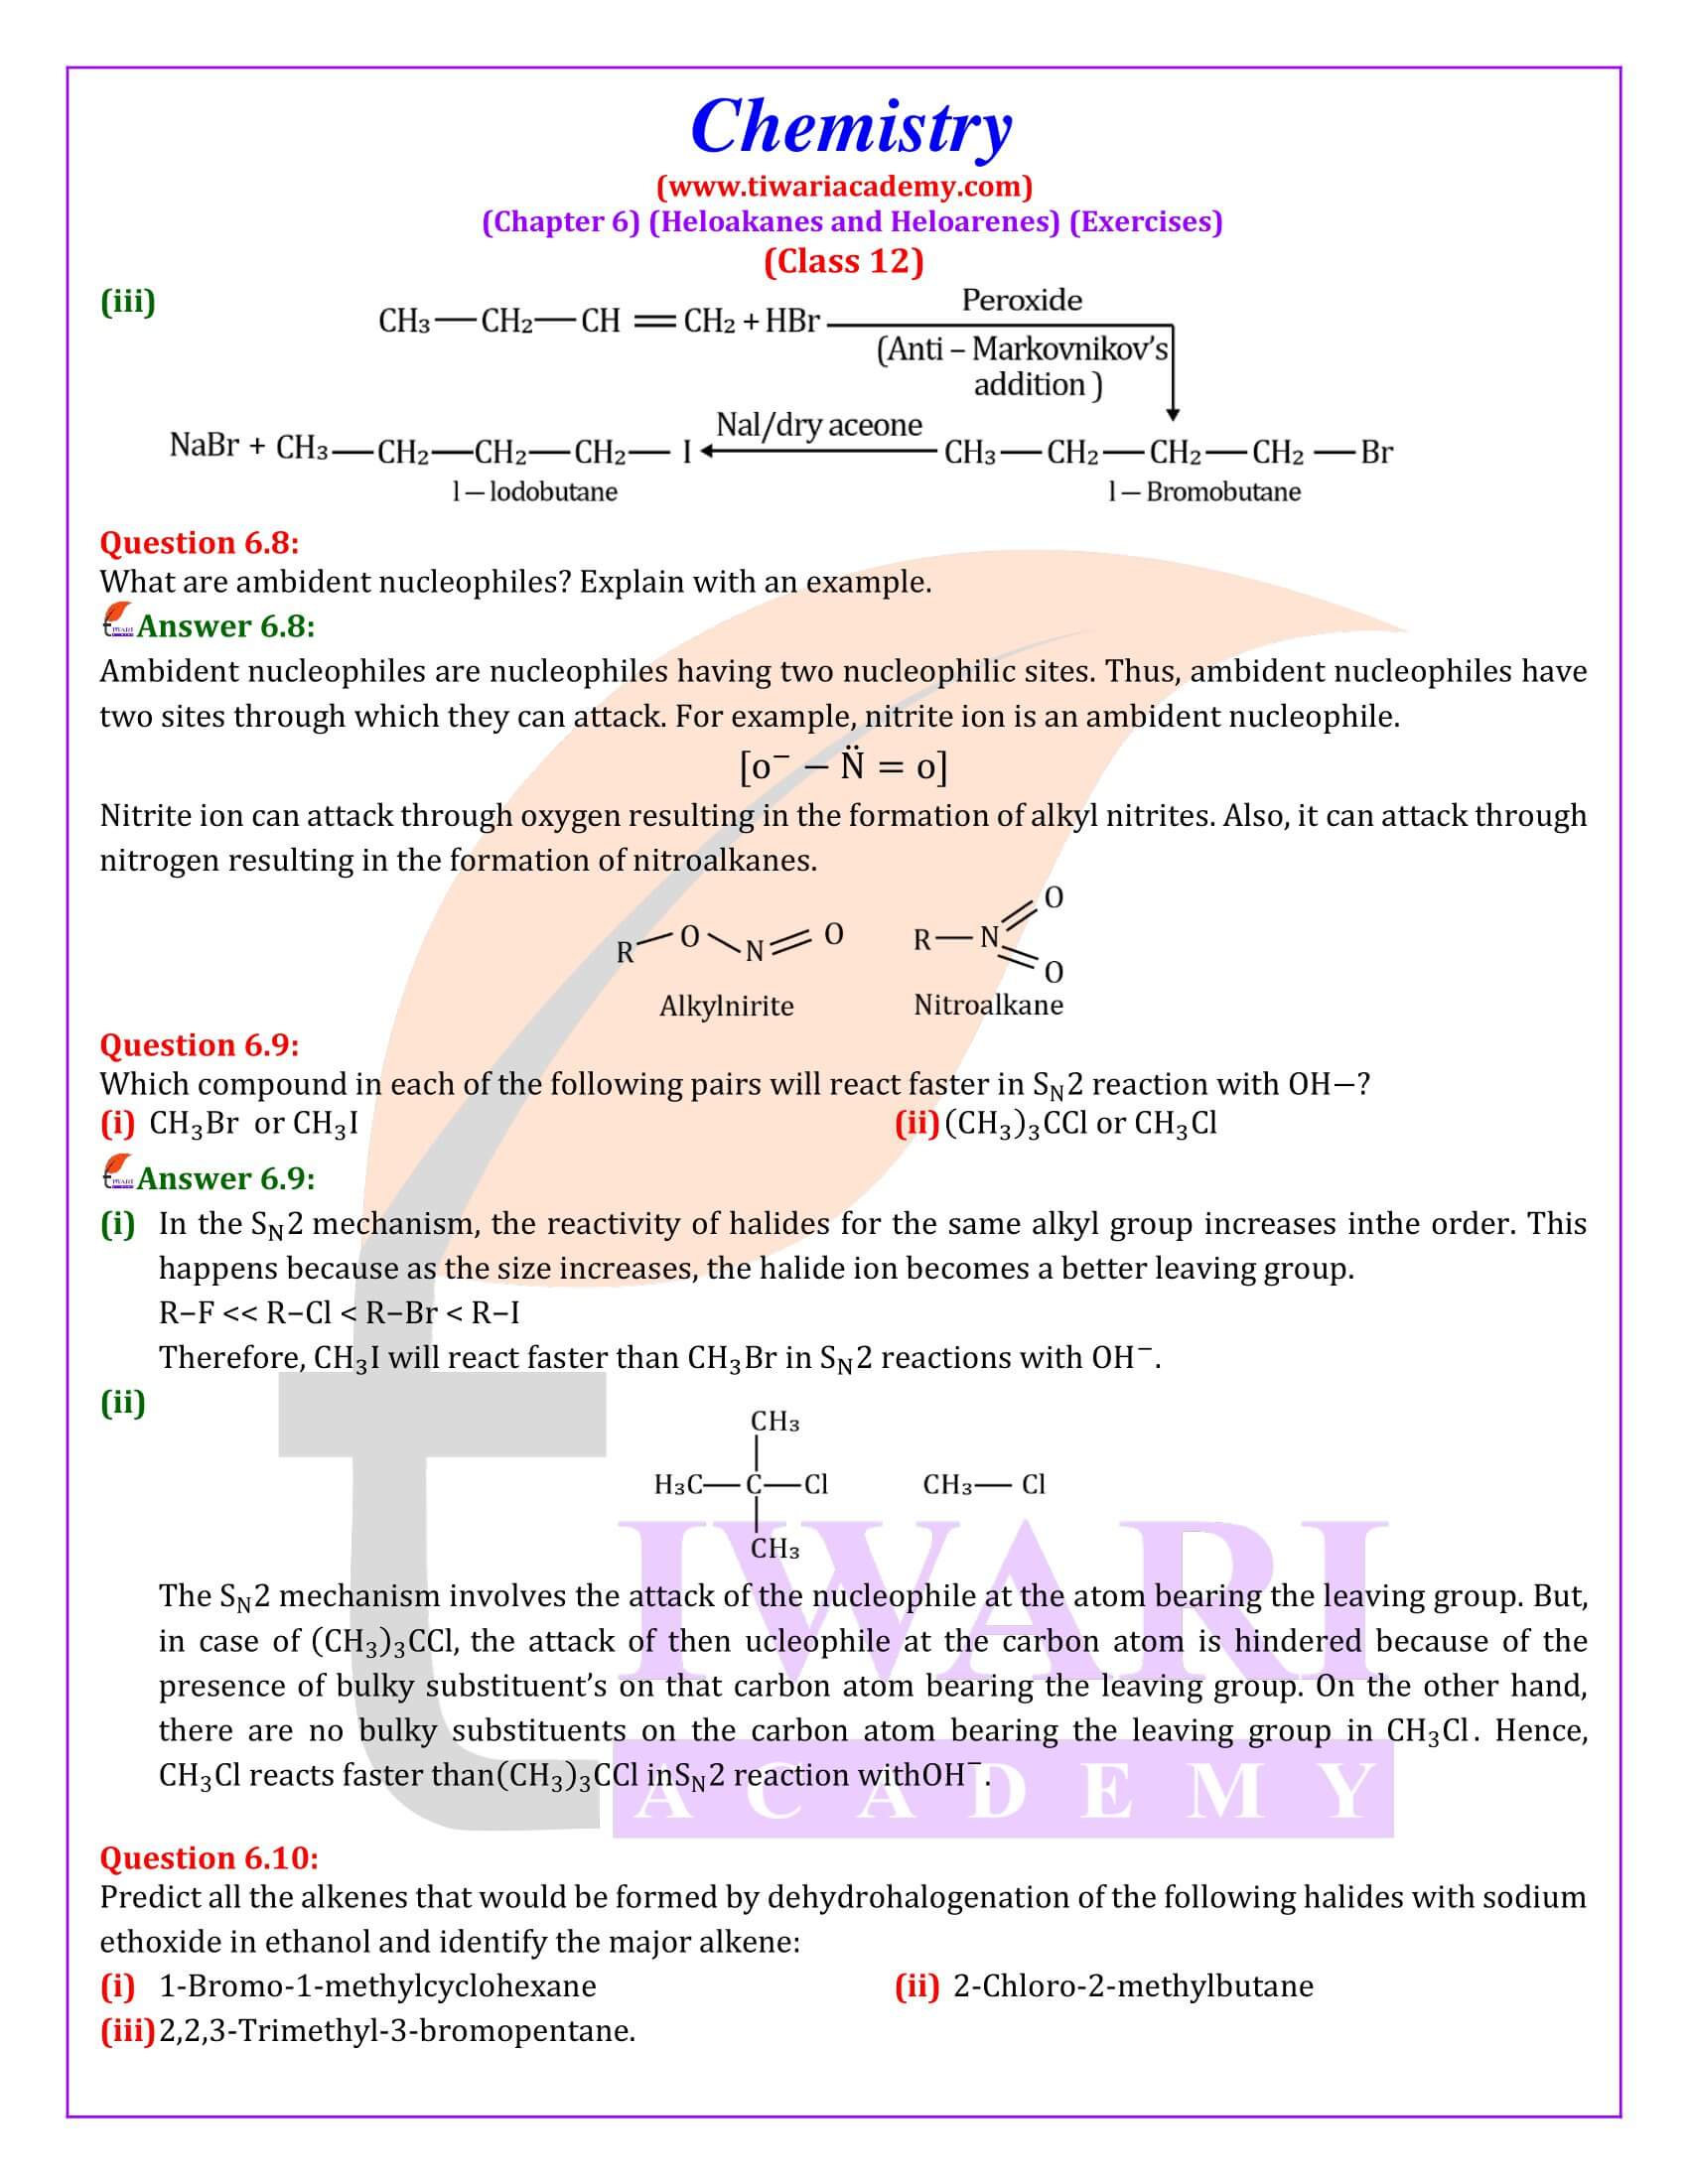 NCERT Solutions for Class 12 Chemistry Chapter 6 Exercises